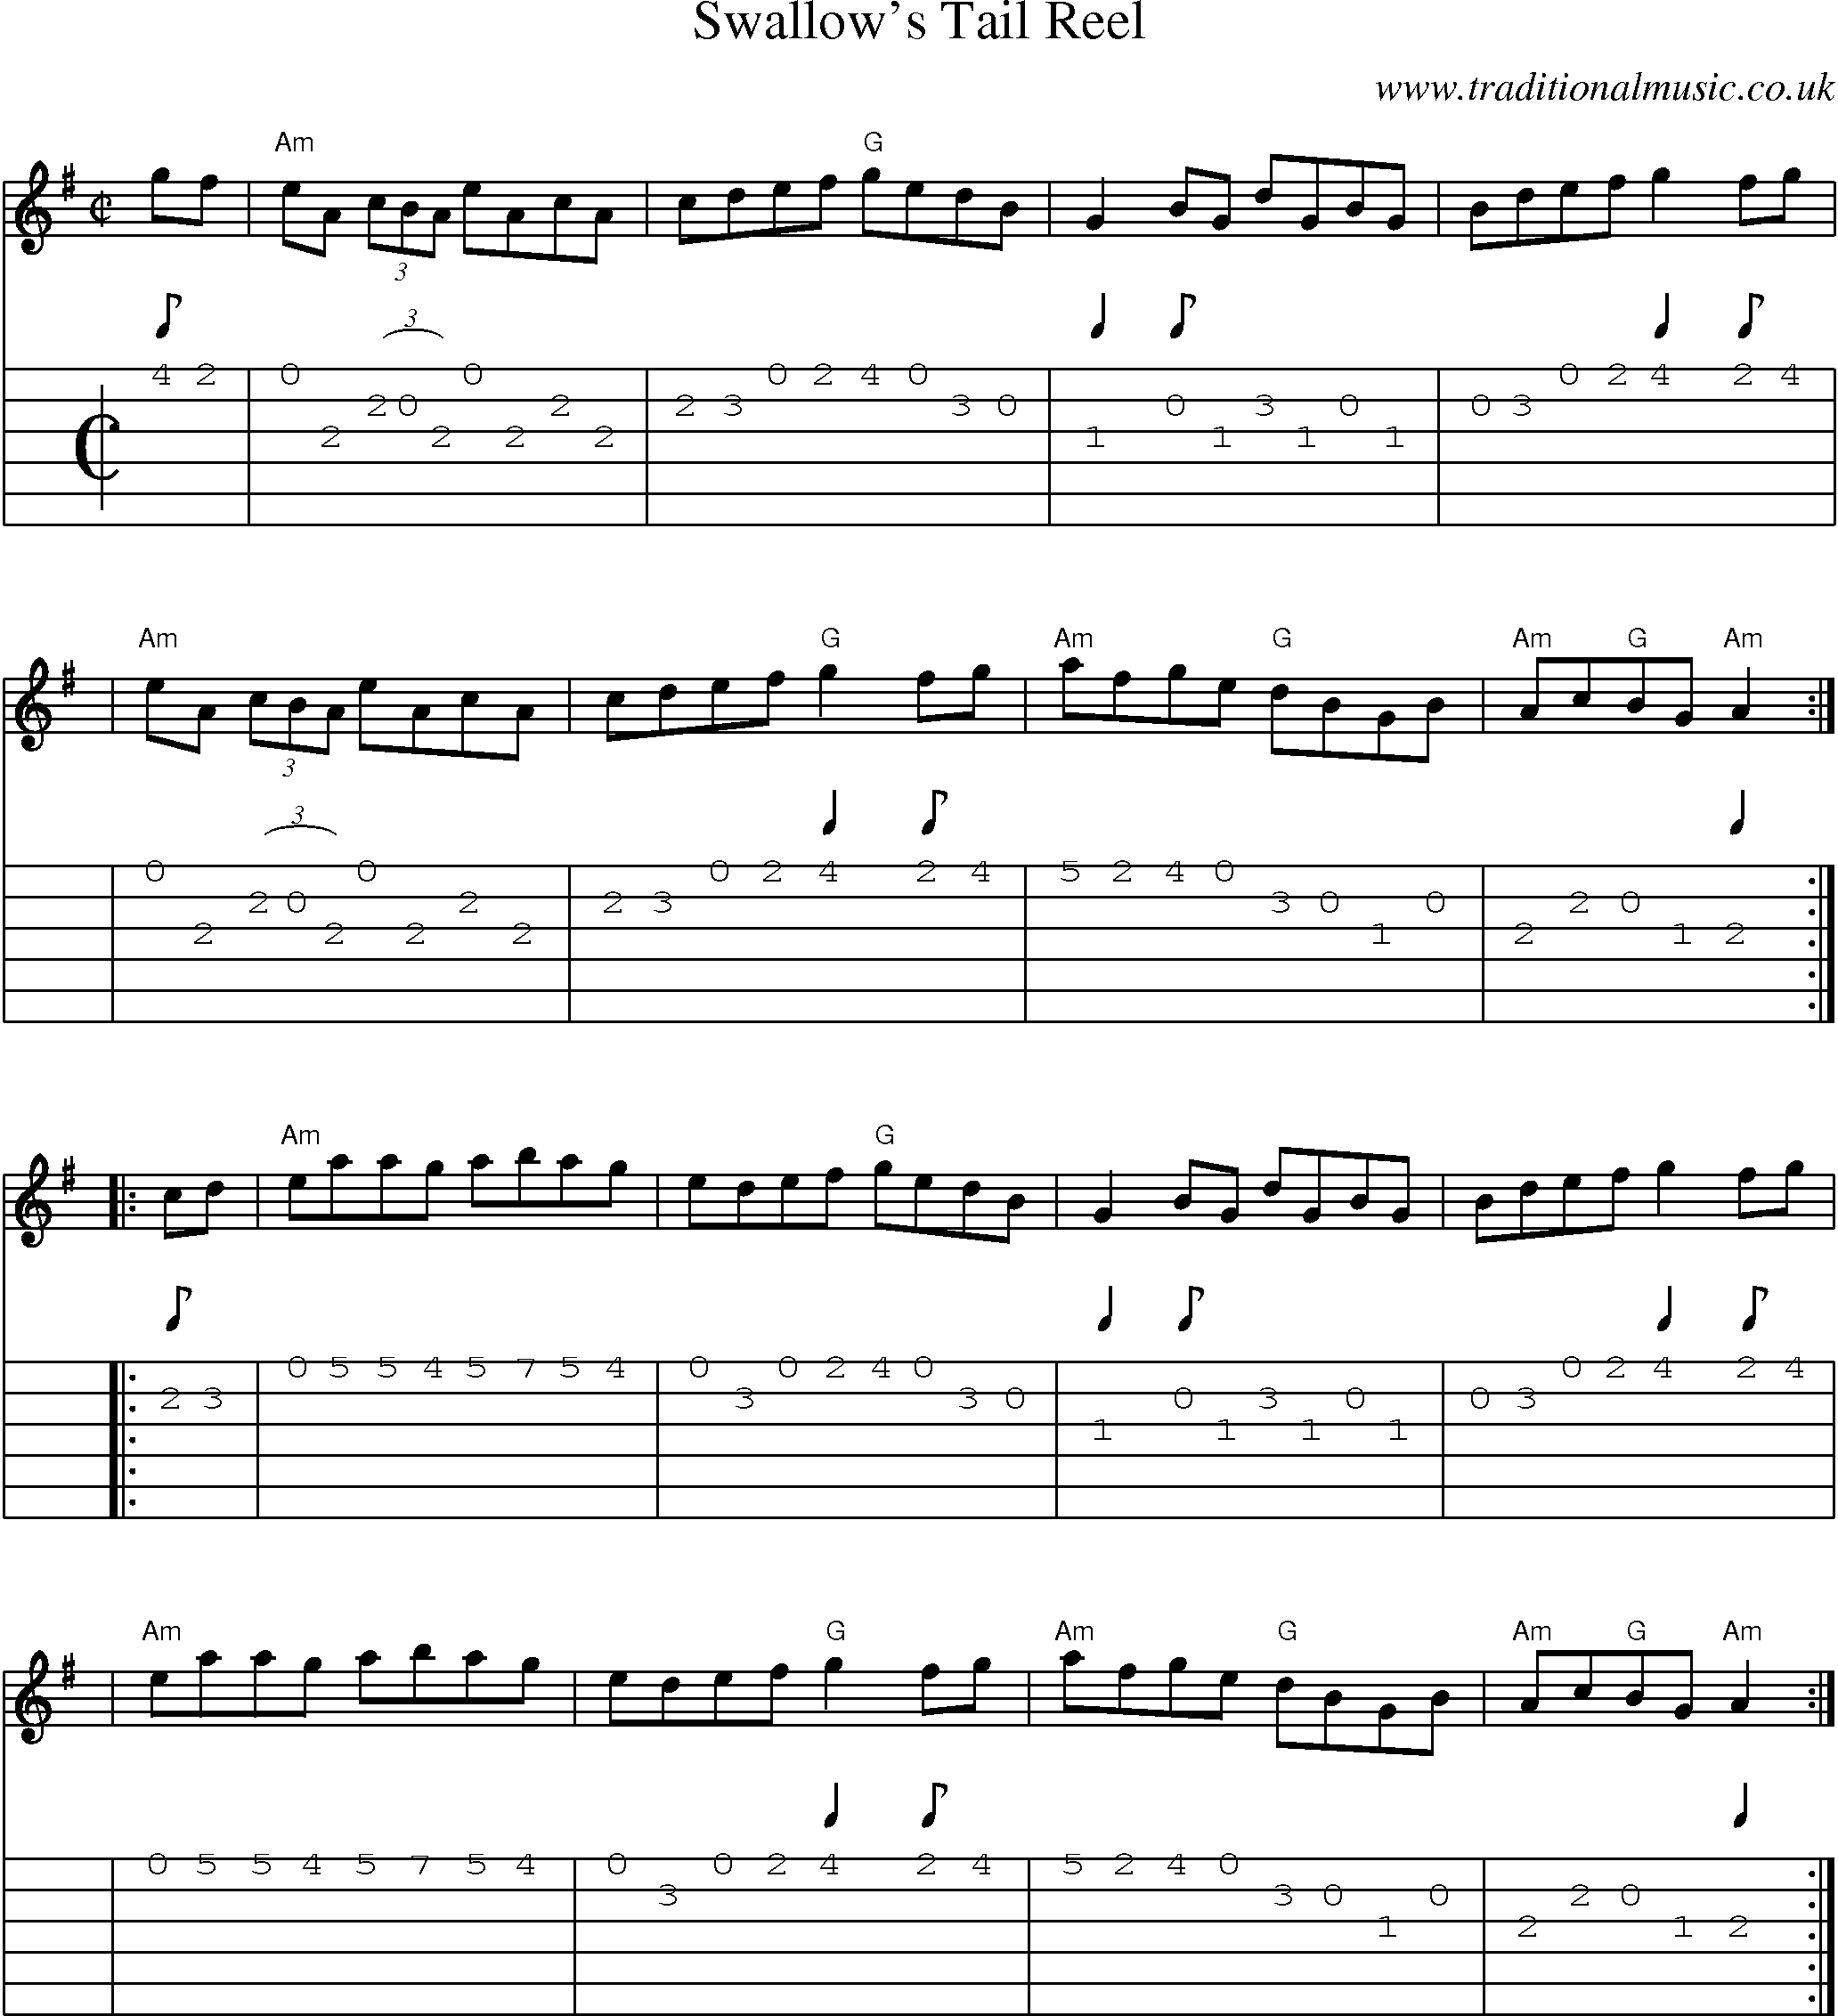 Music Score and Guitar Tabs for Swallows Tail Reel